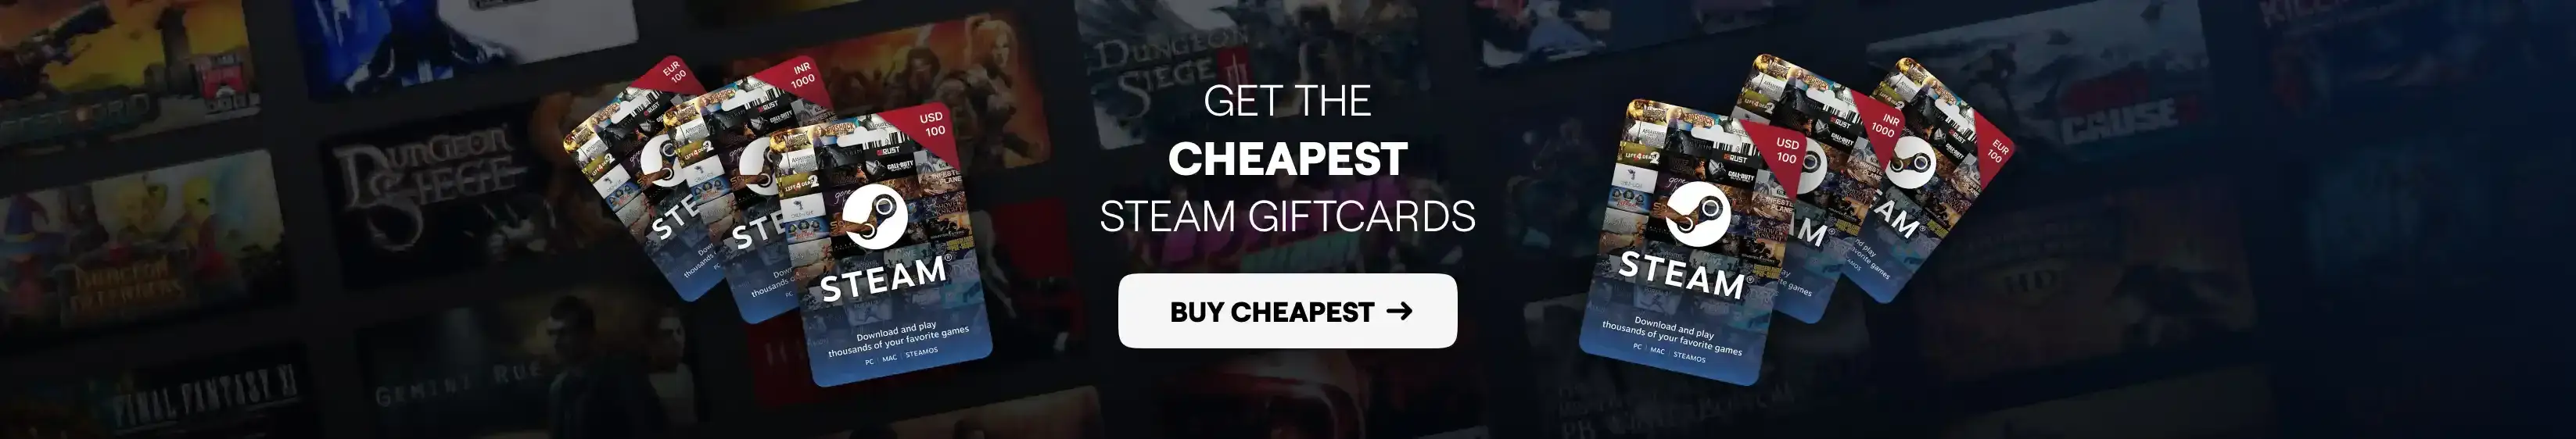 Steam Giftcards Web